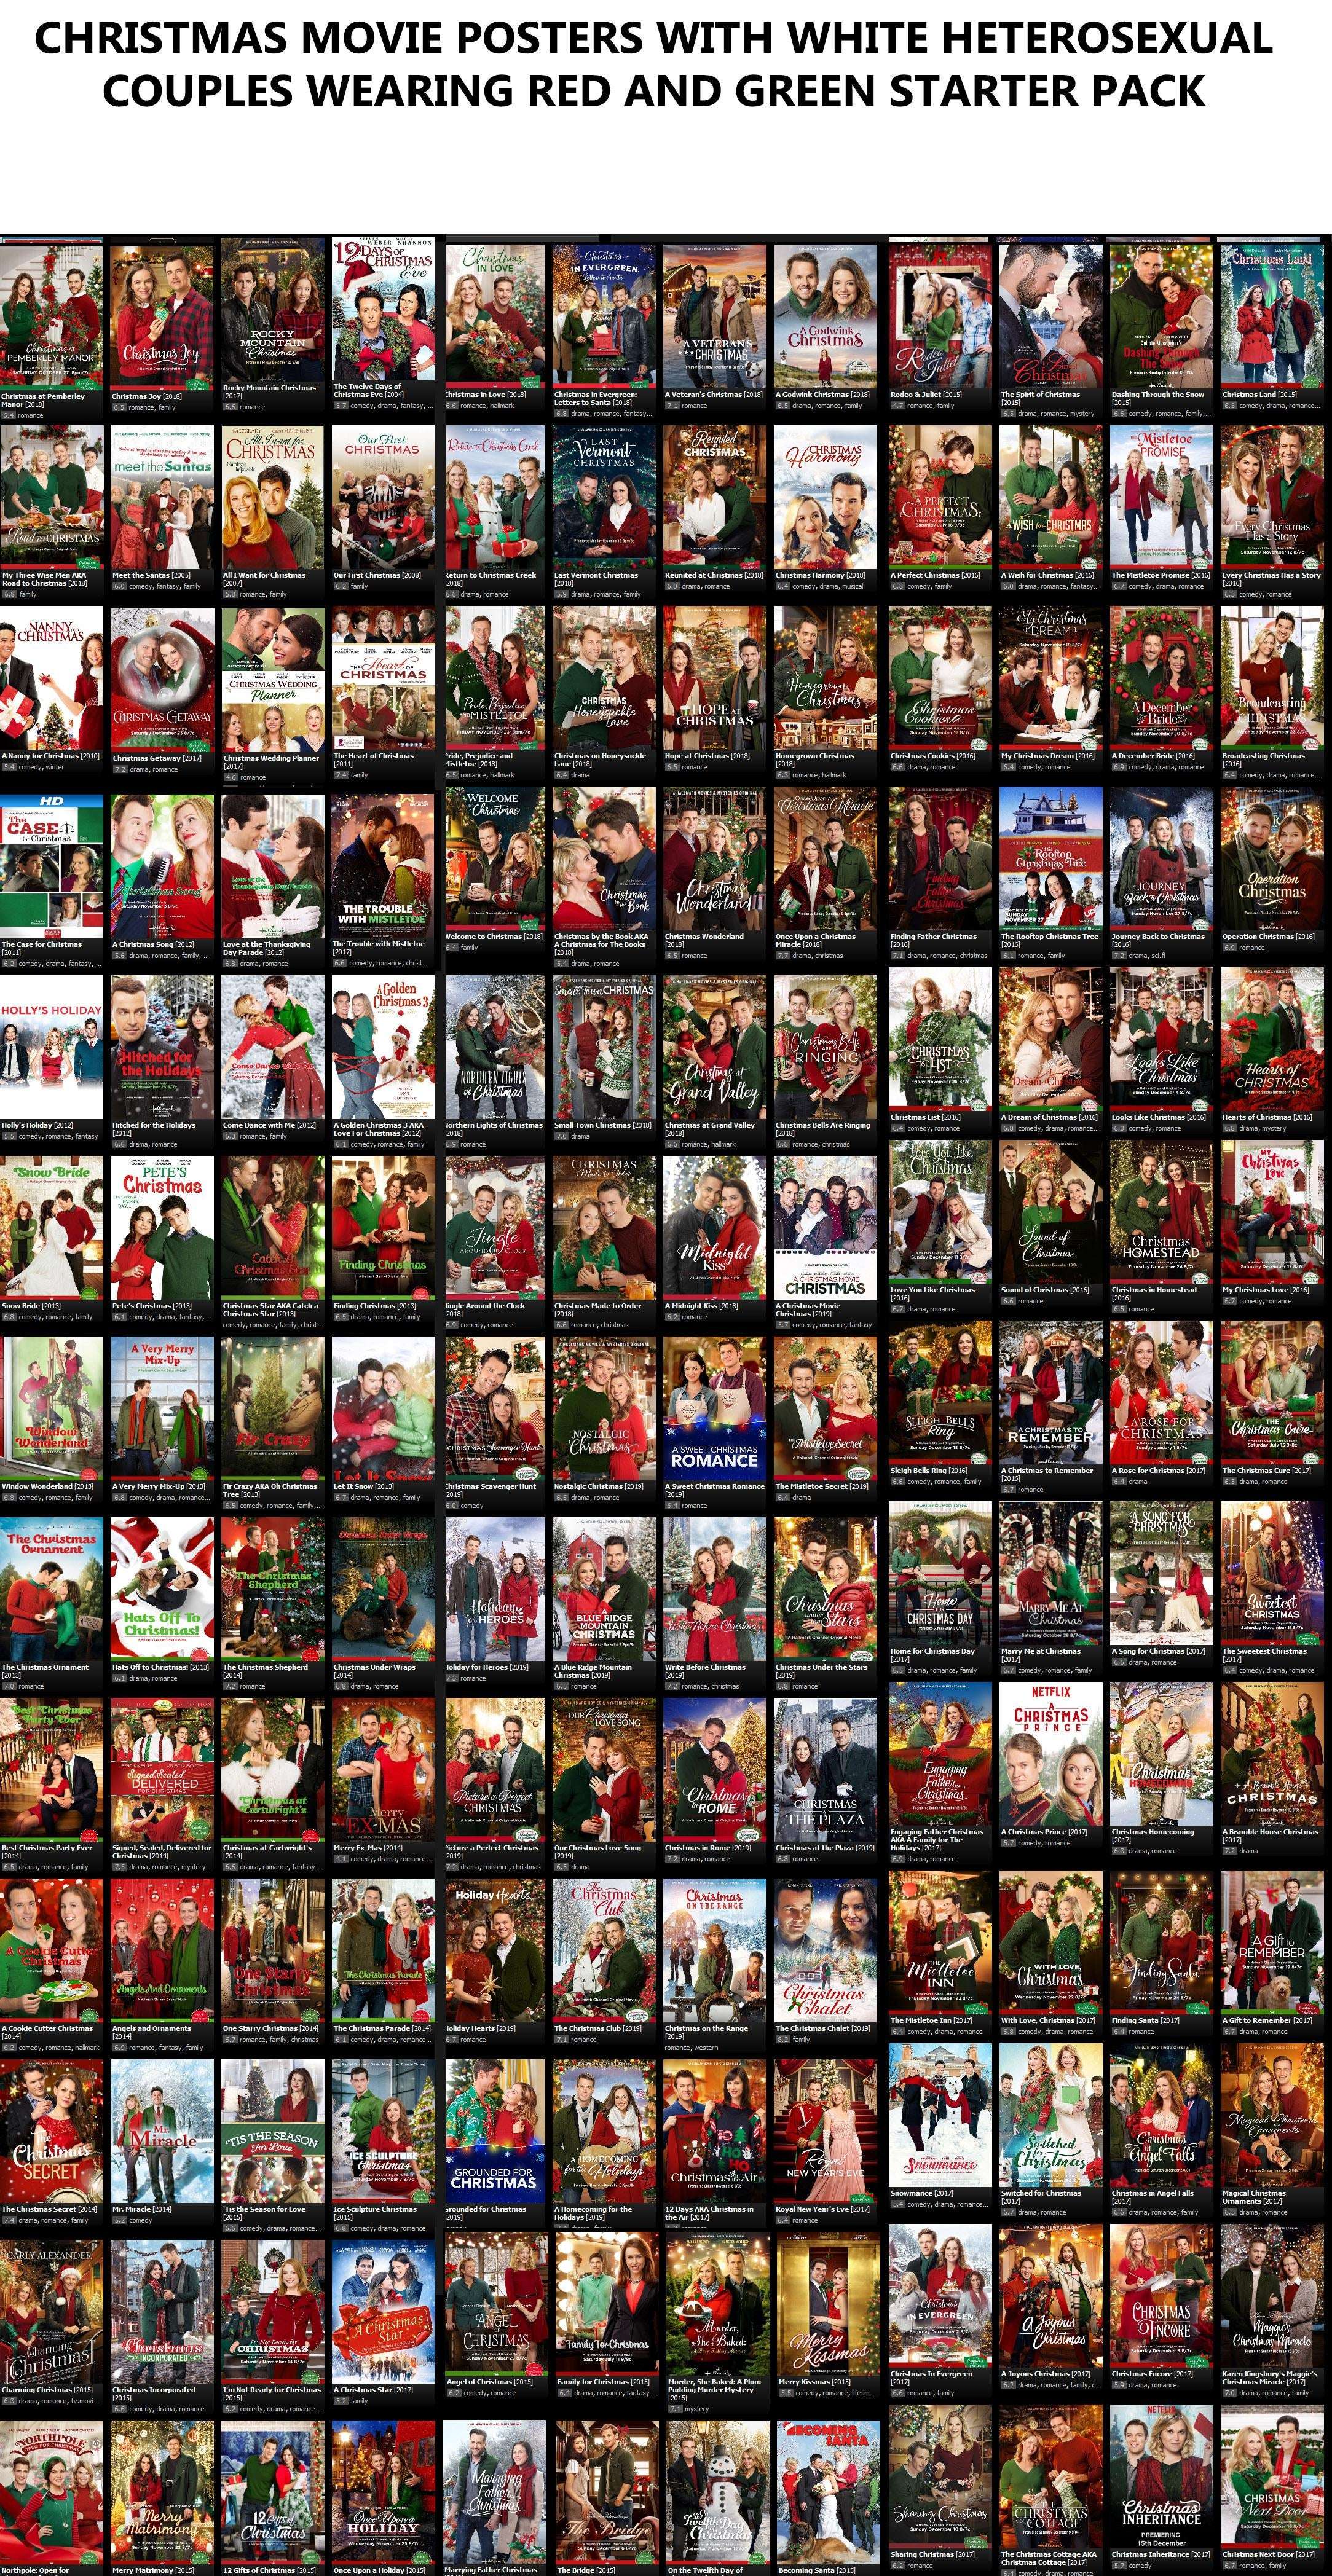 image showing Christmas Movie Posters with White Heterosexual Couples Wearing Red and Green Starter Pack